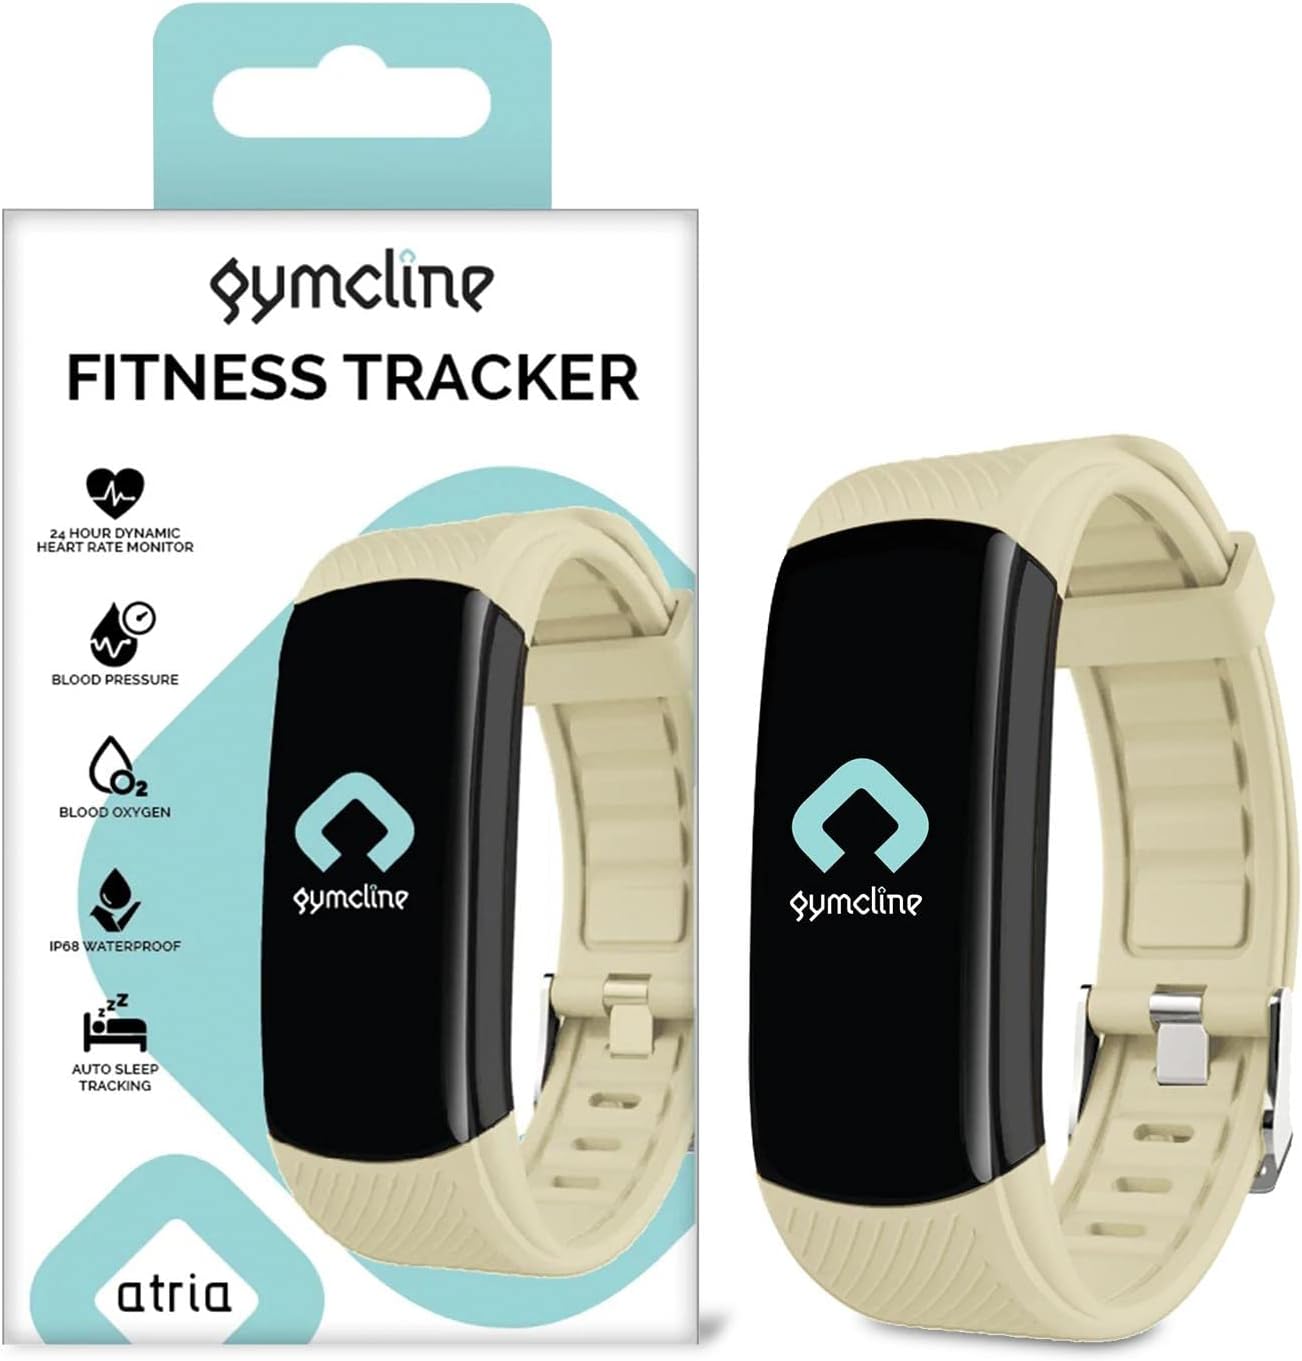 Gymcline Atria Fitness Tracker with 24H Daily Activity Tracking (Cream) RRP 29.99 CLEARANCE XL 14.99